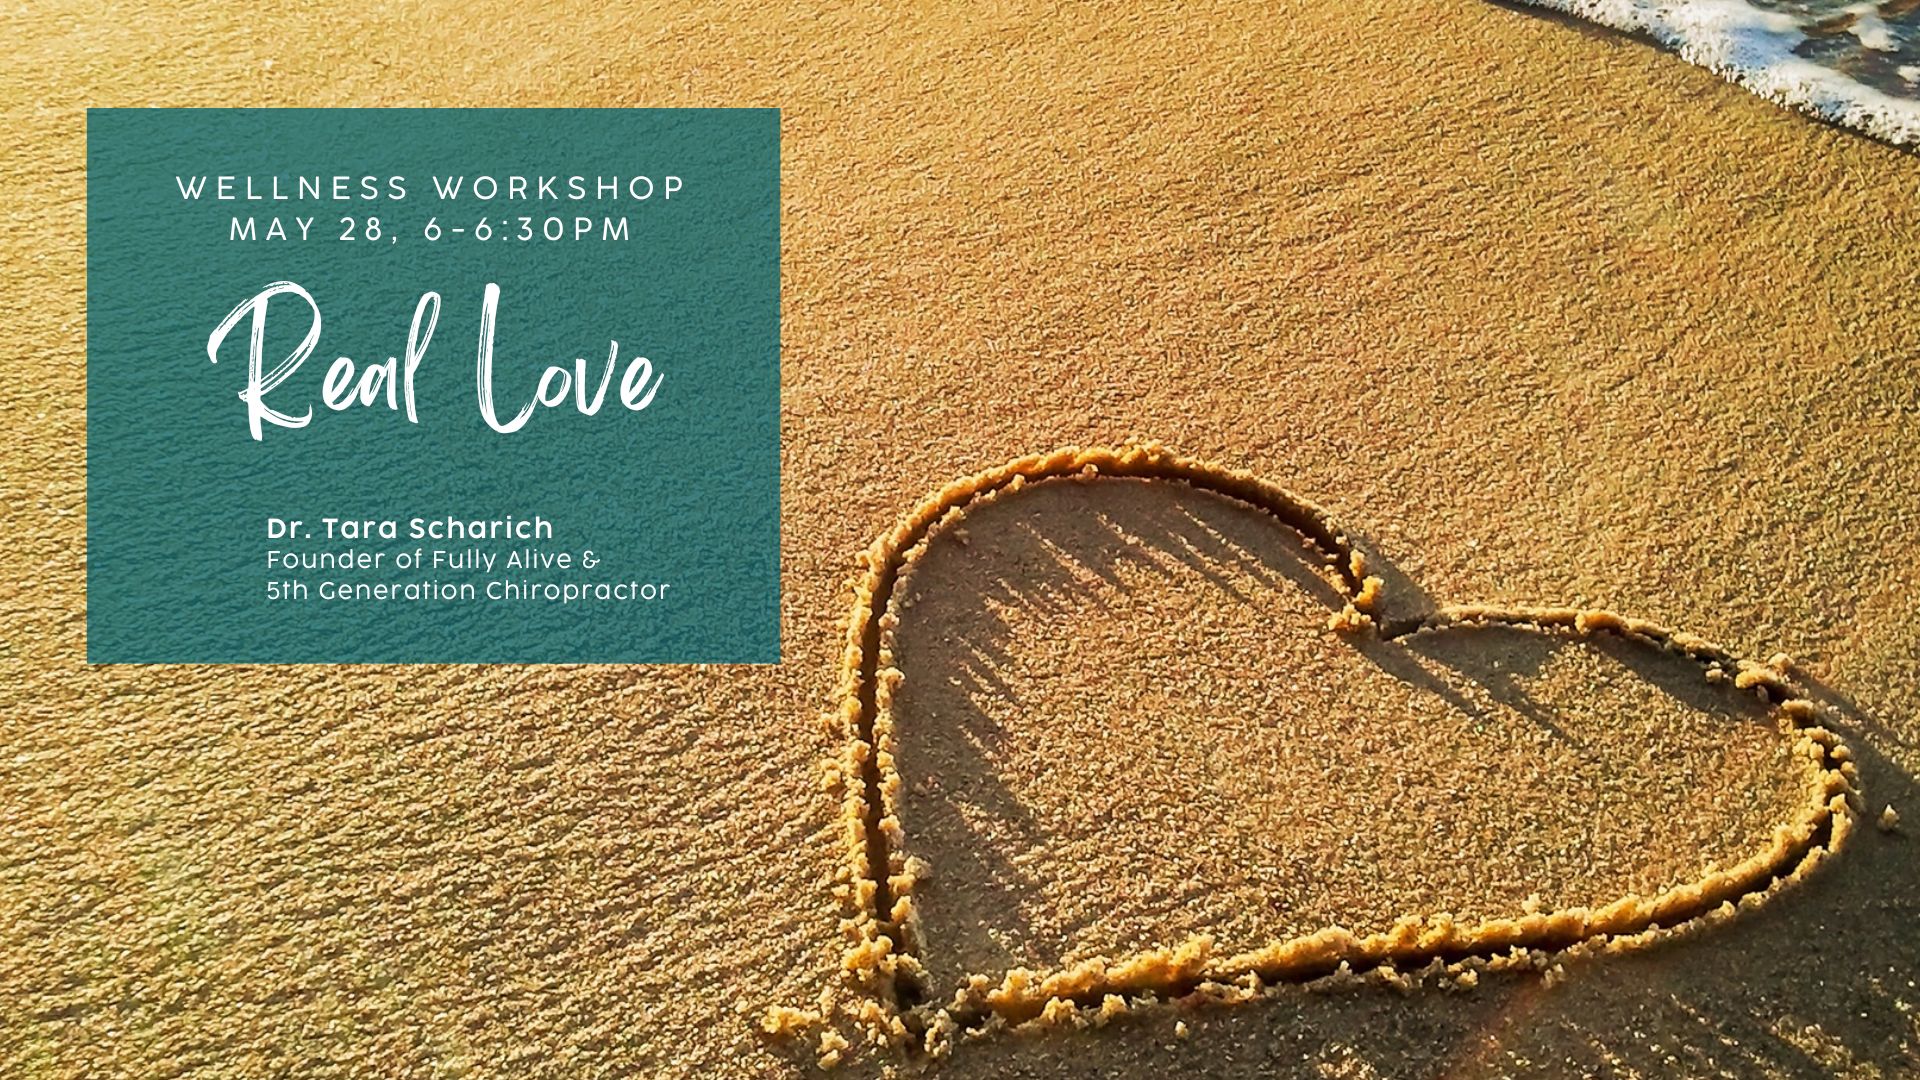 REal Love Wellness Workshop Event hosted by Fully Alive Family Chiropracti in St. Joseph, MI